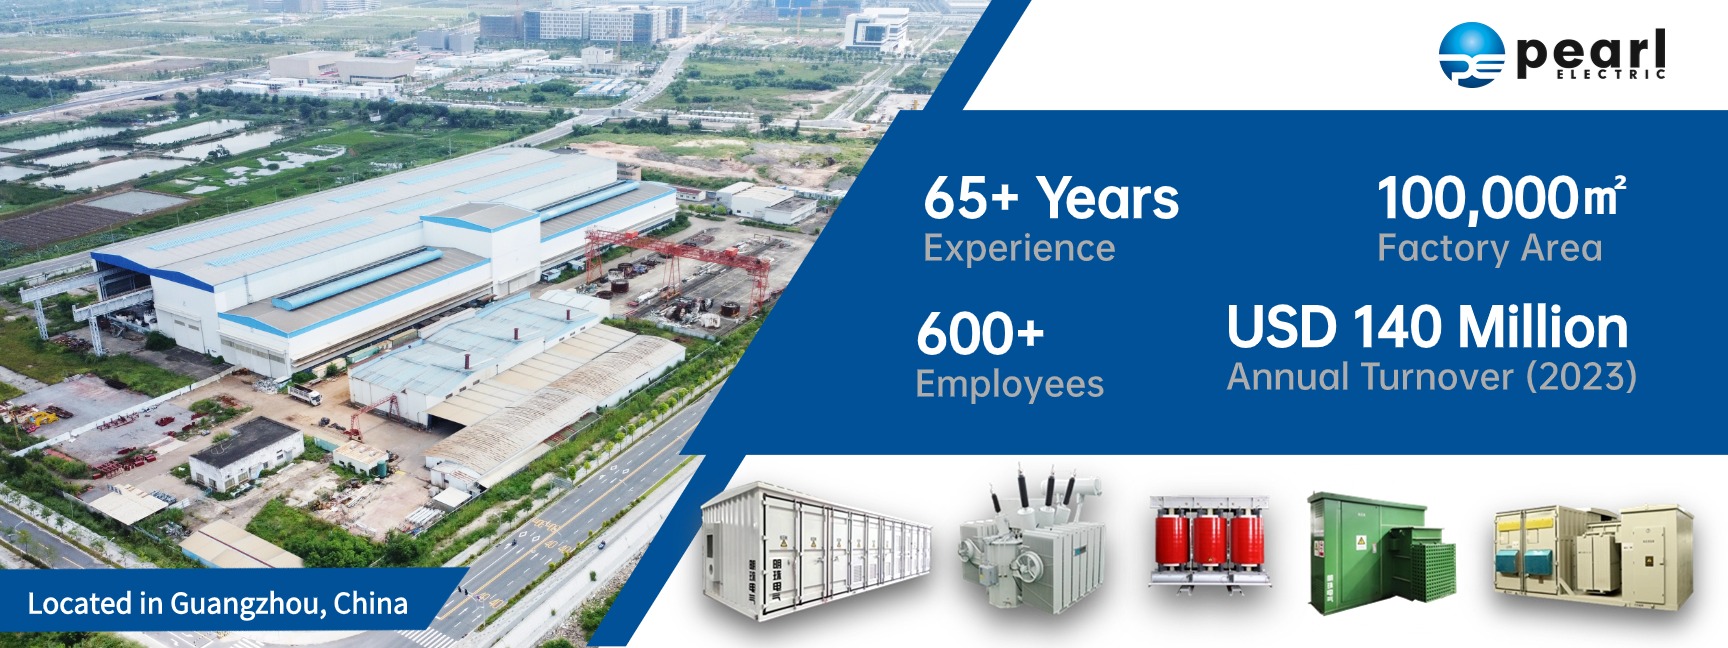 Reliable power transformer manufacturer since 1958.